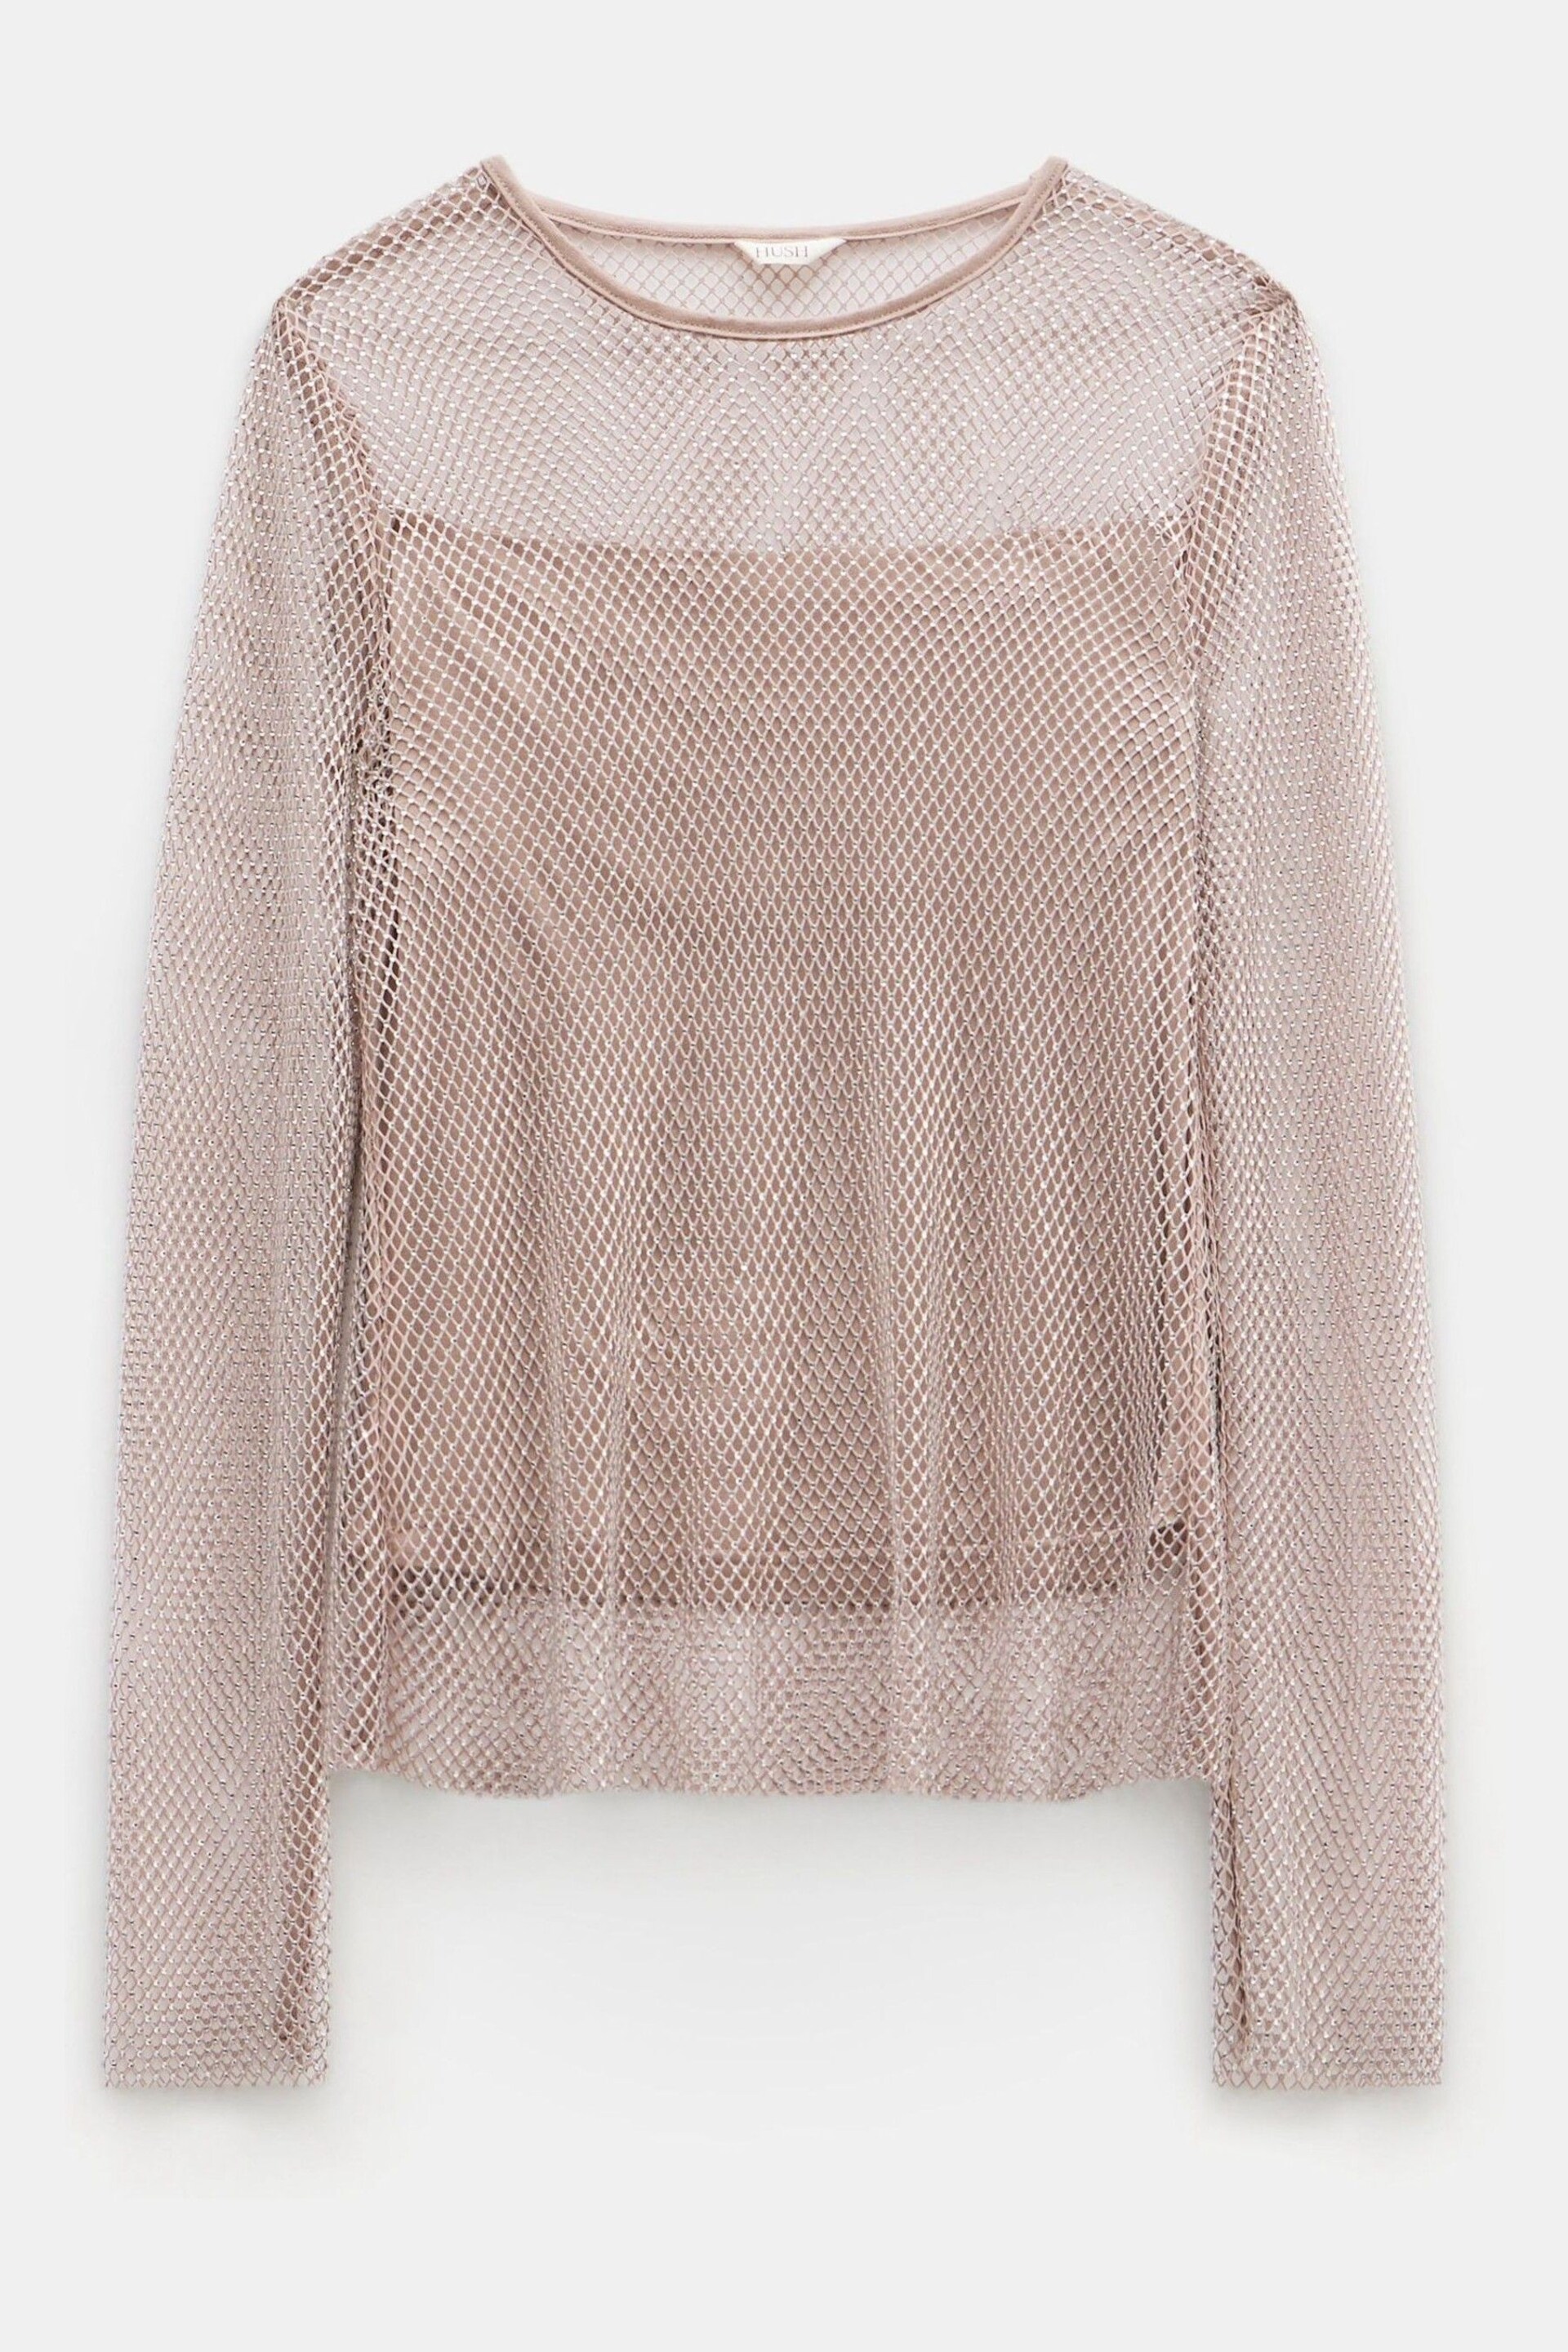 Hush Natural Una Sparkle Long Sleeve Top - Image 5 of 5